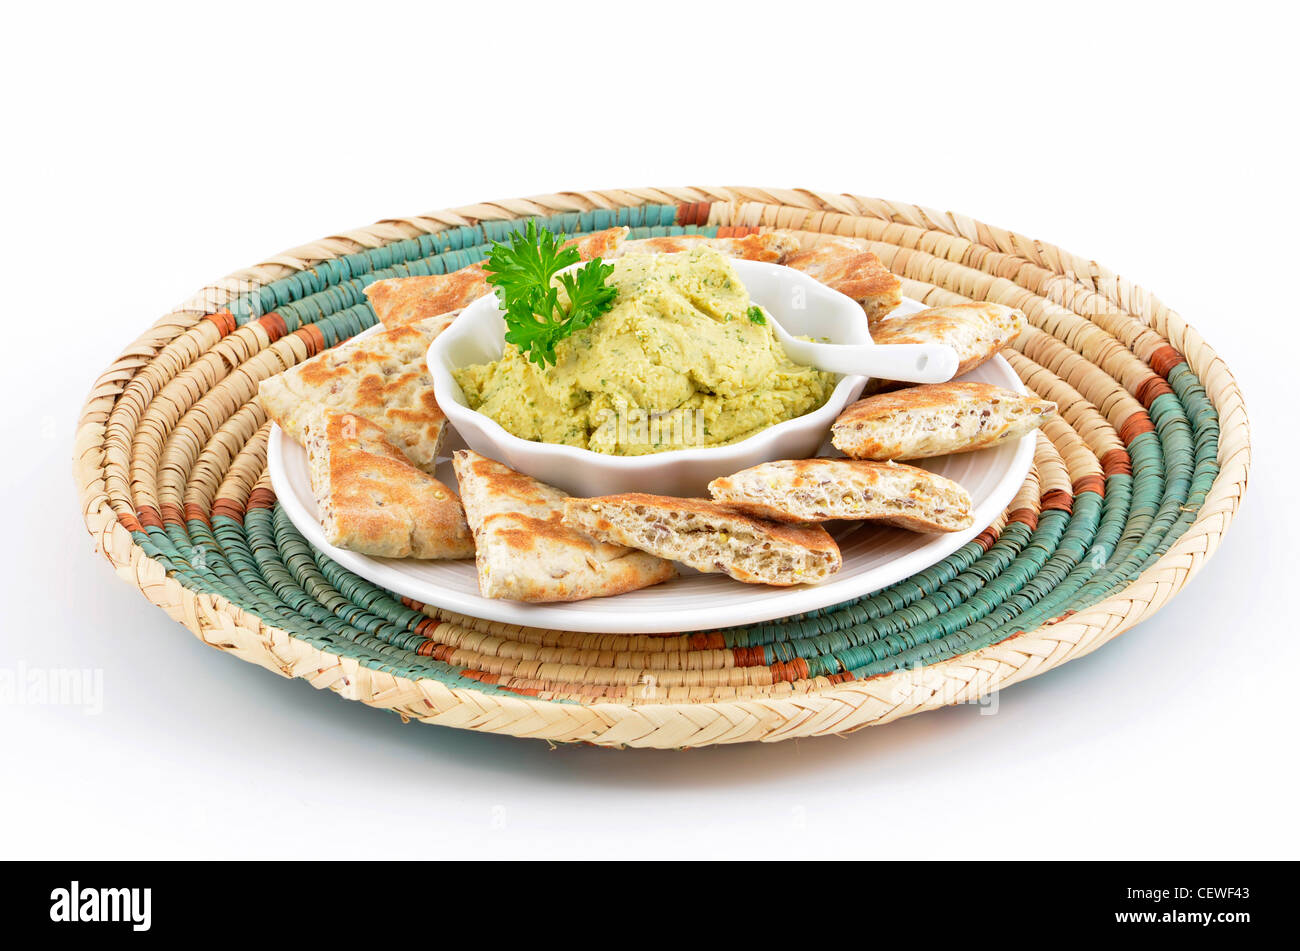 Fresh homemade hummus with pita bread triangles on decorative woven tray with white background in horizontal format Stock Photo